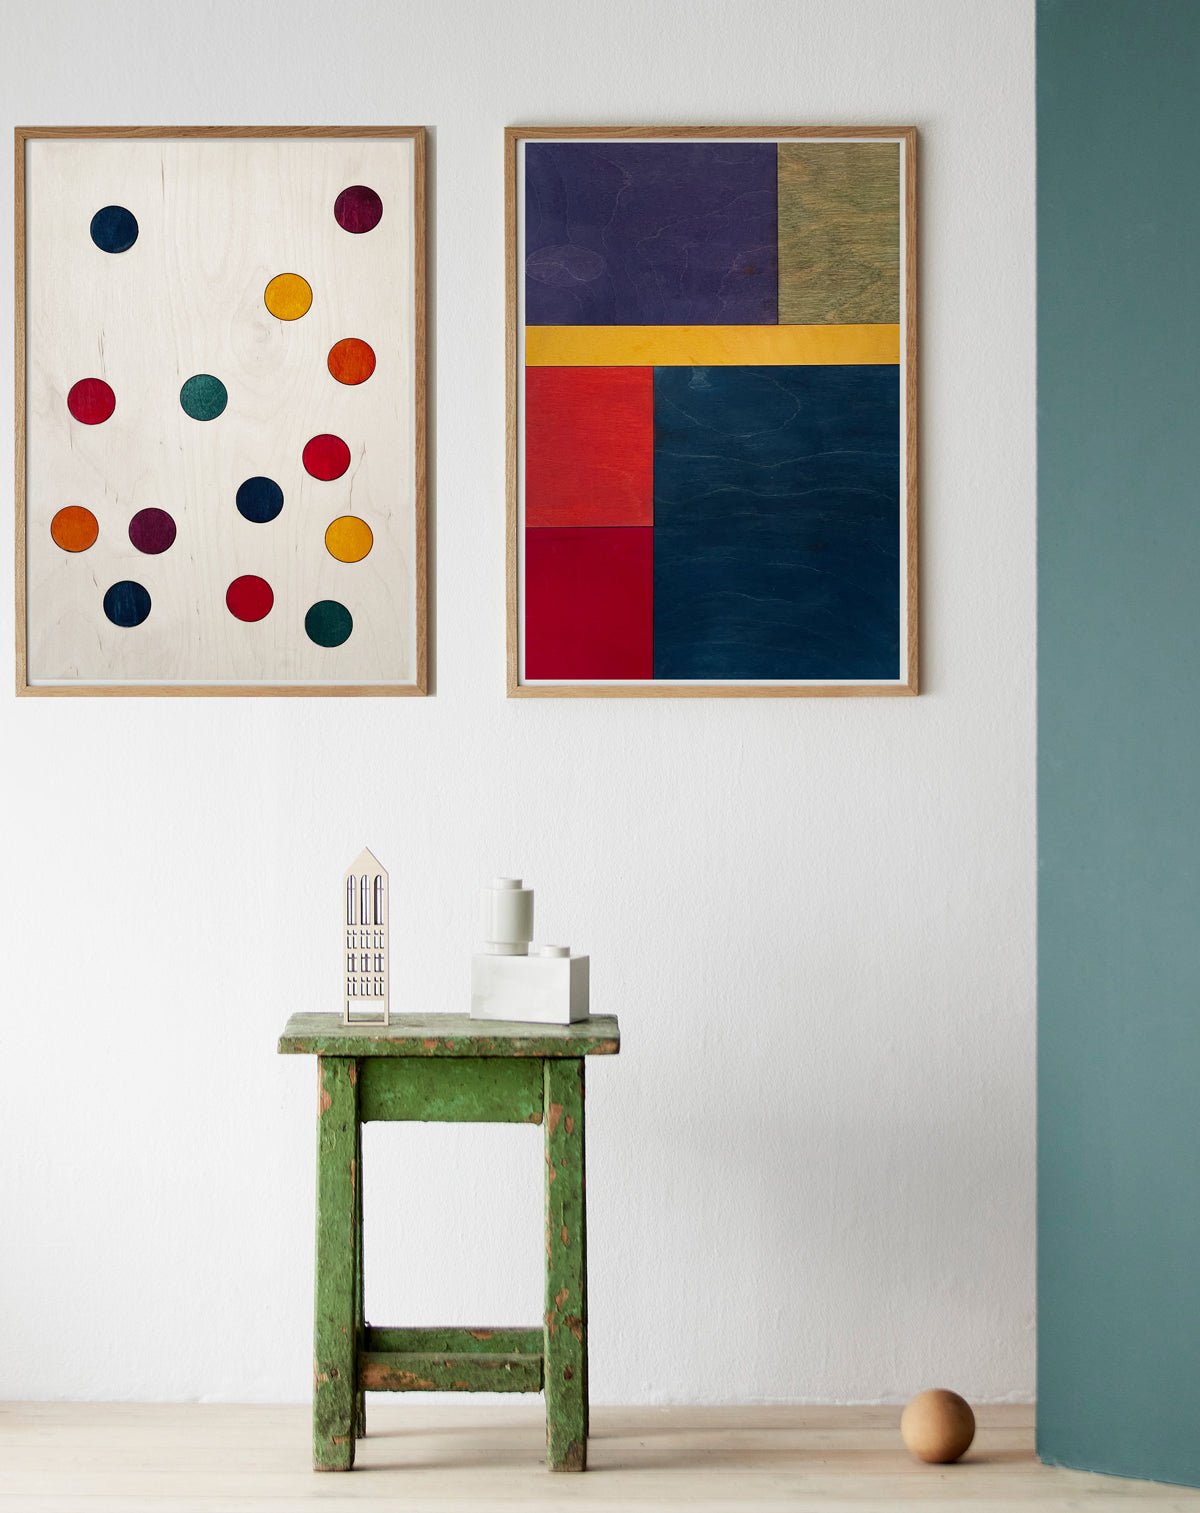 Abstract and graphic art posters with colors of the rainbow to add an artistic touch to the homes interior.